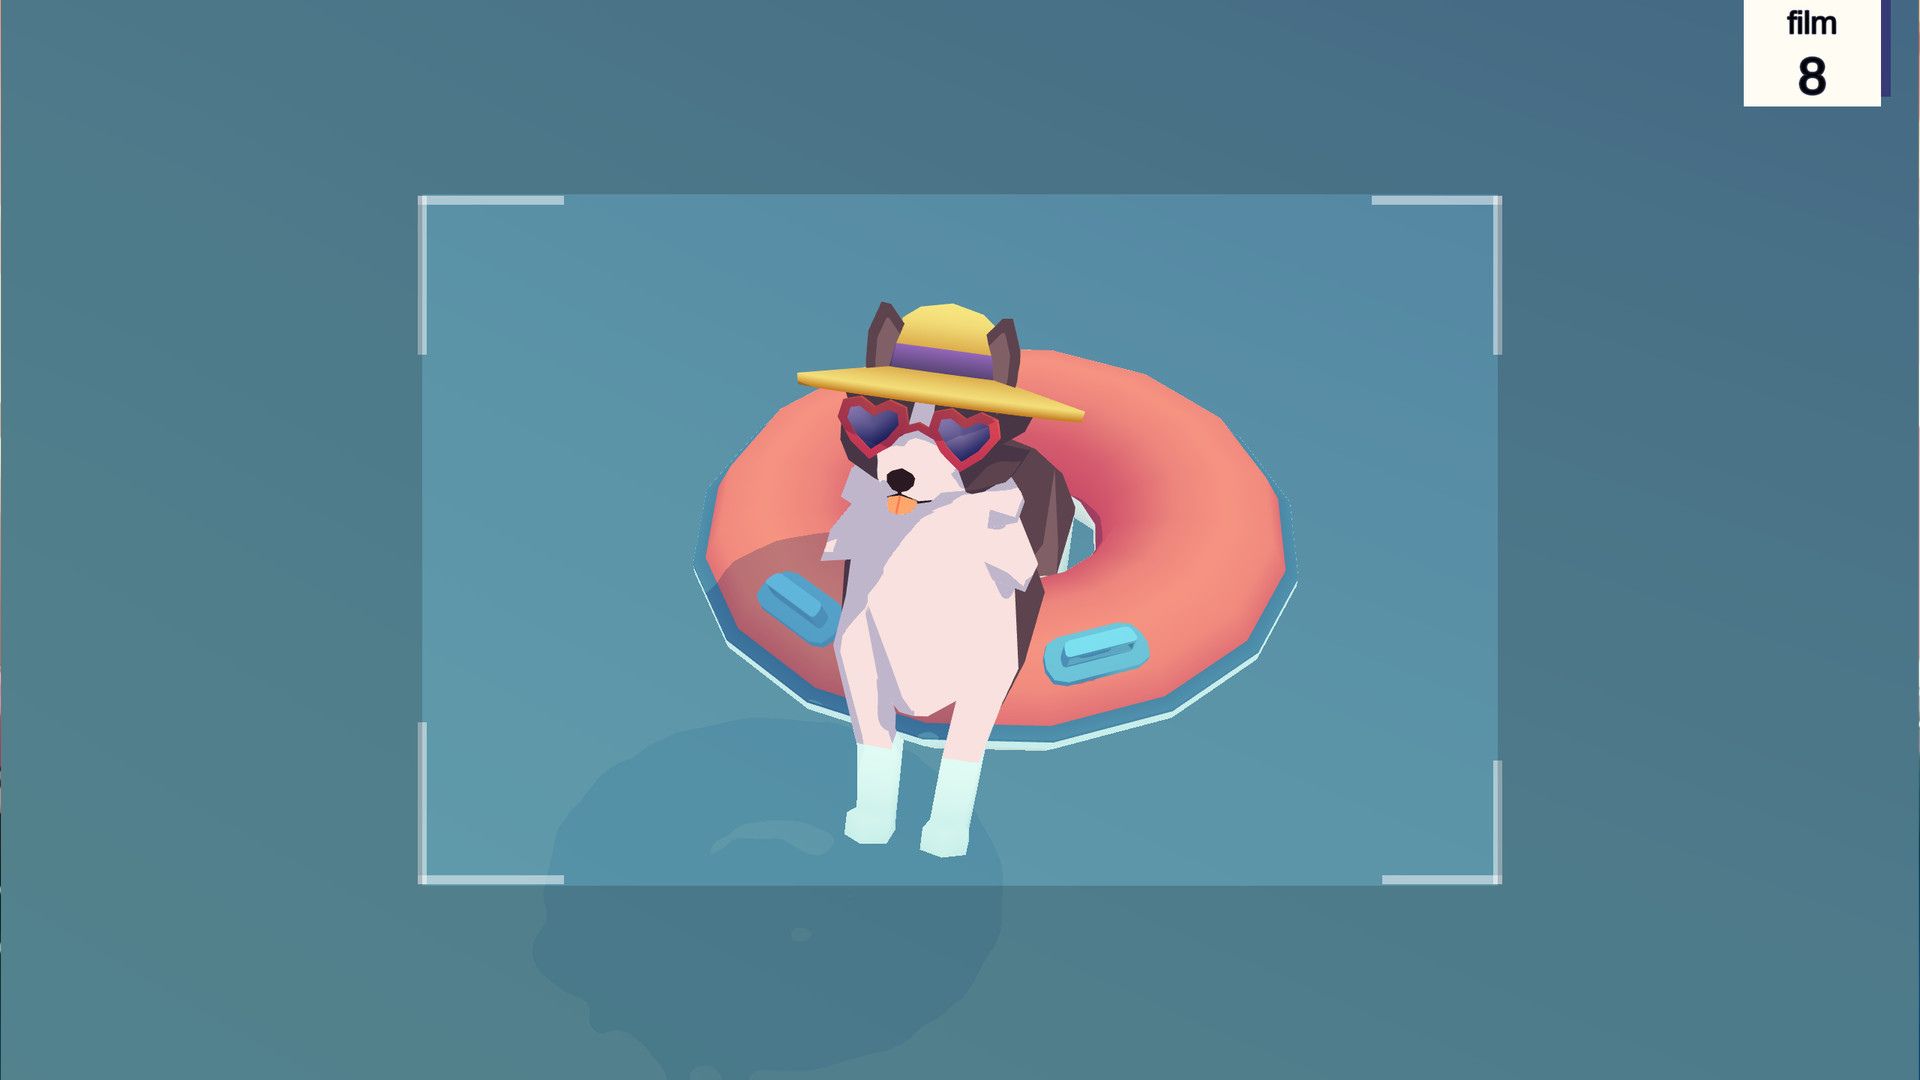 Surfing games - a dog in sunglasses and a hat sat in a pool donut in a pool.